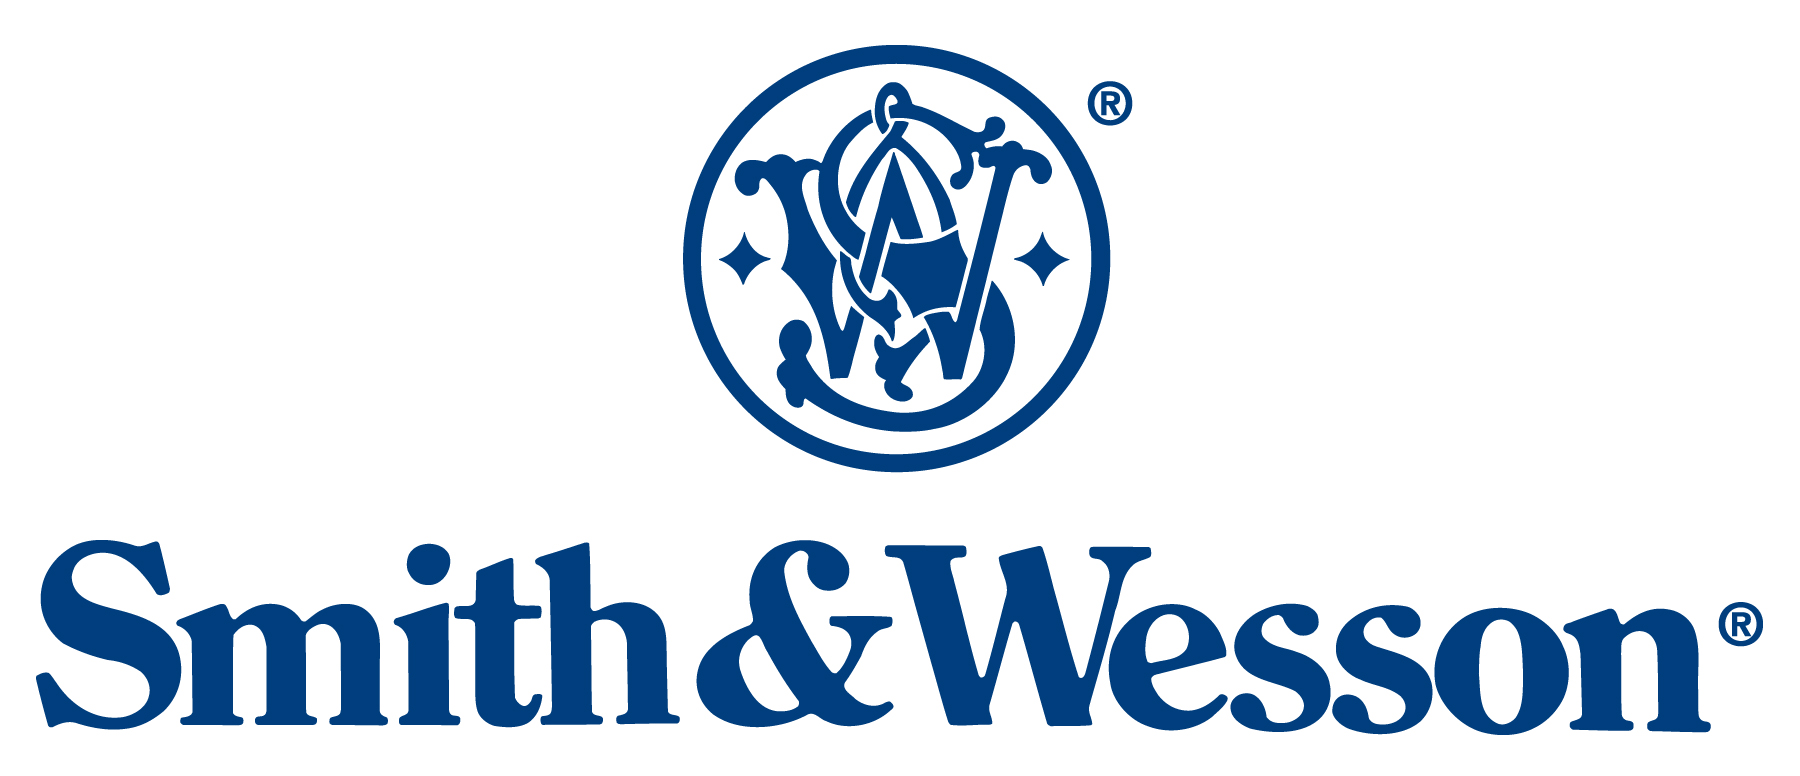 Smith And Wesson Logo Wallpaper logos   smith wesson 1800x776